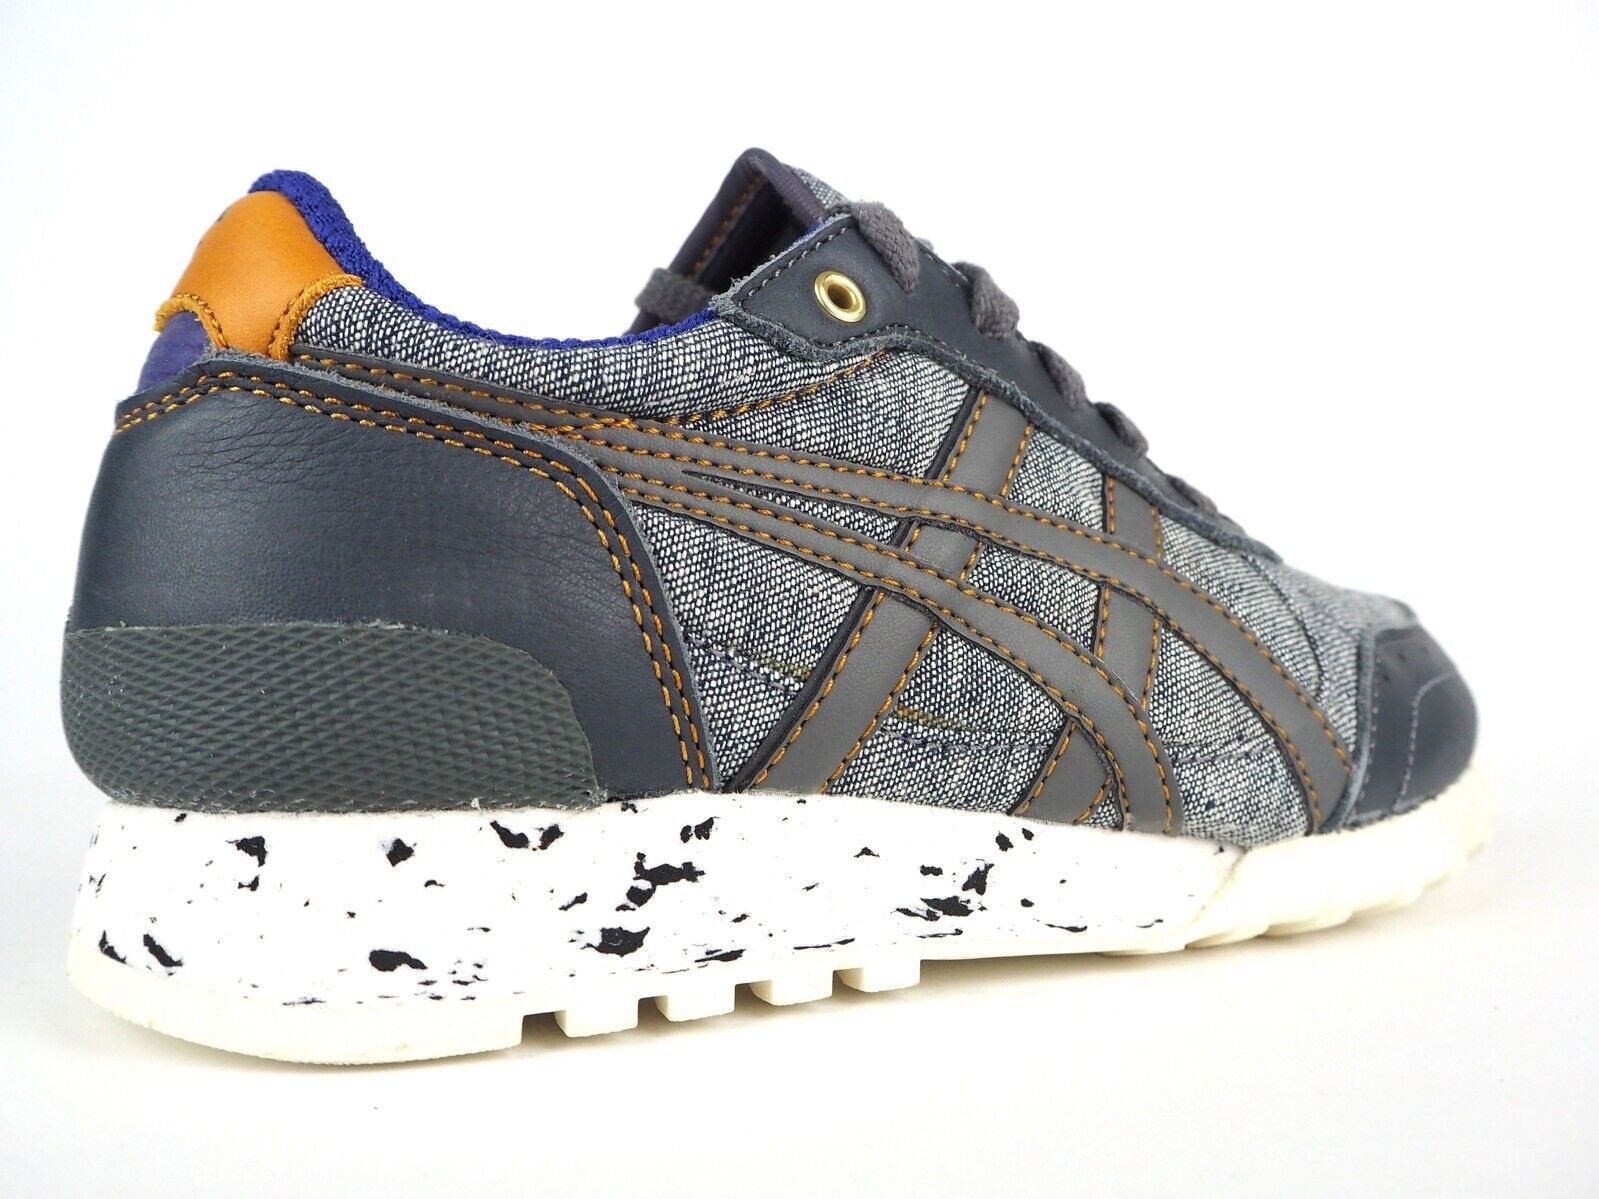 OnitsukaTiger Unisex Colorado 85 D517N Denim Grey Lace Up Casual Trainers